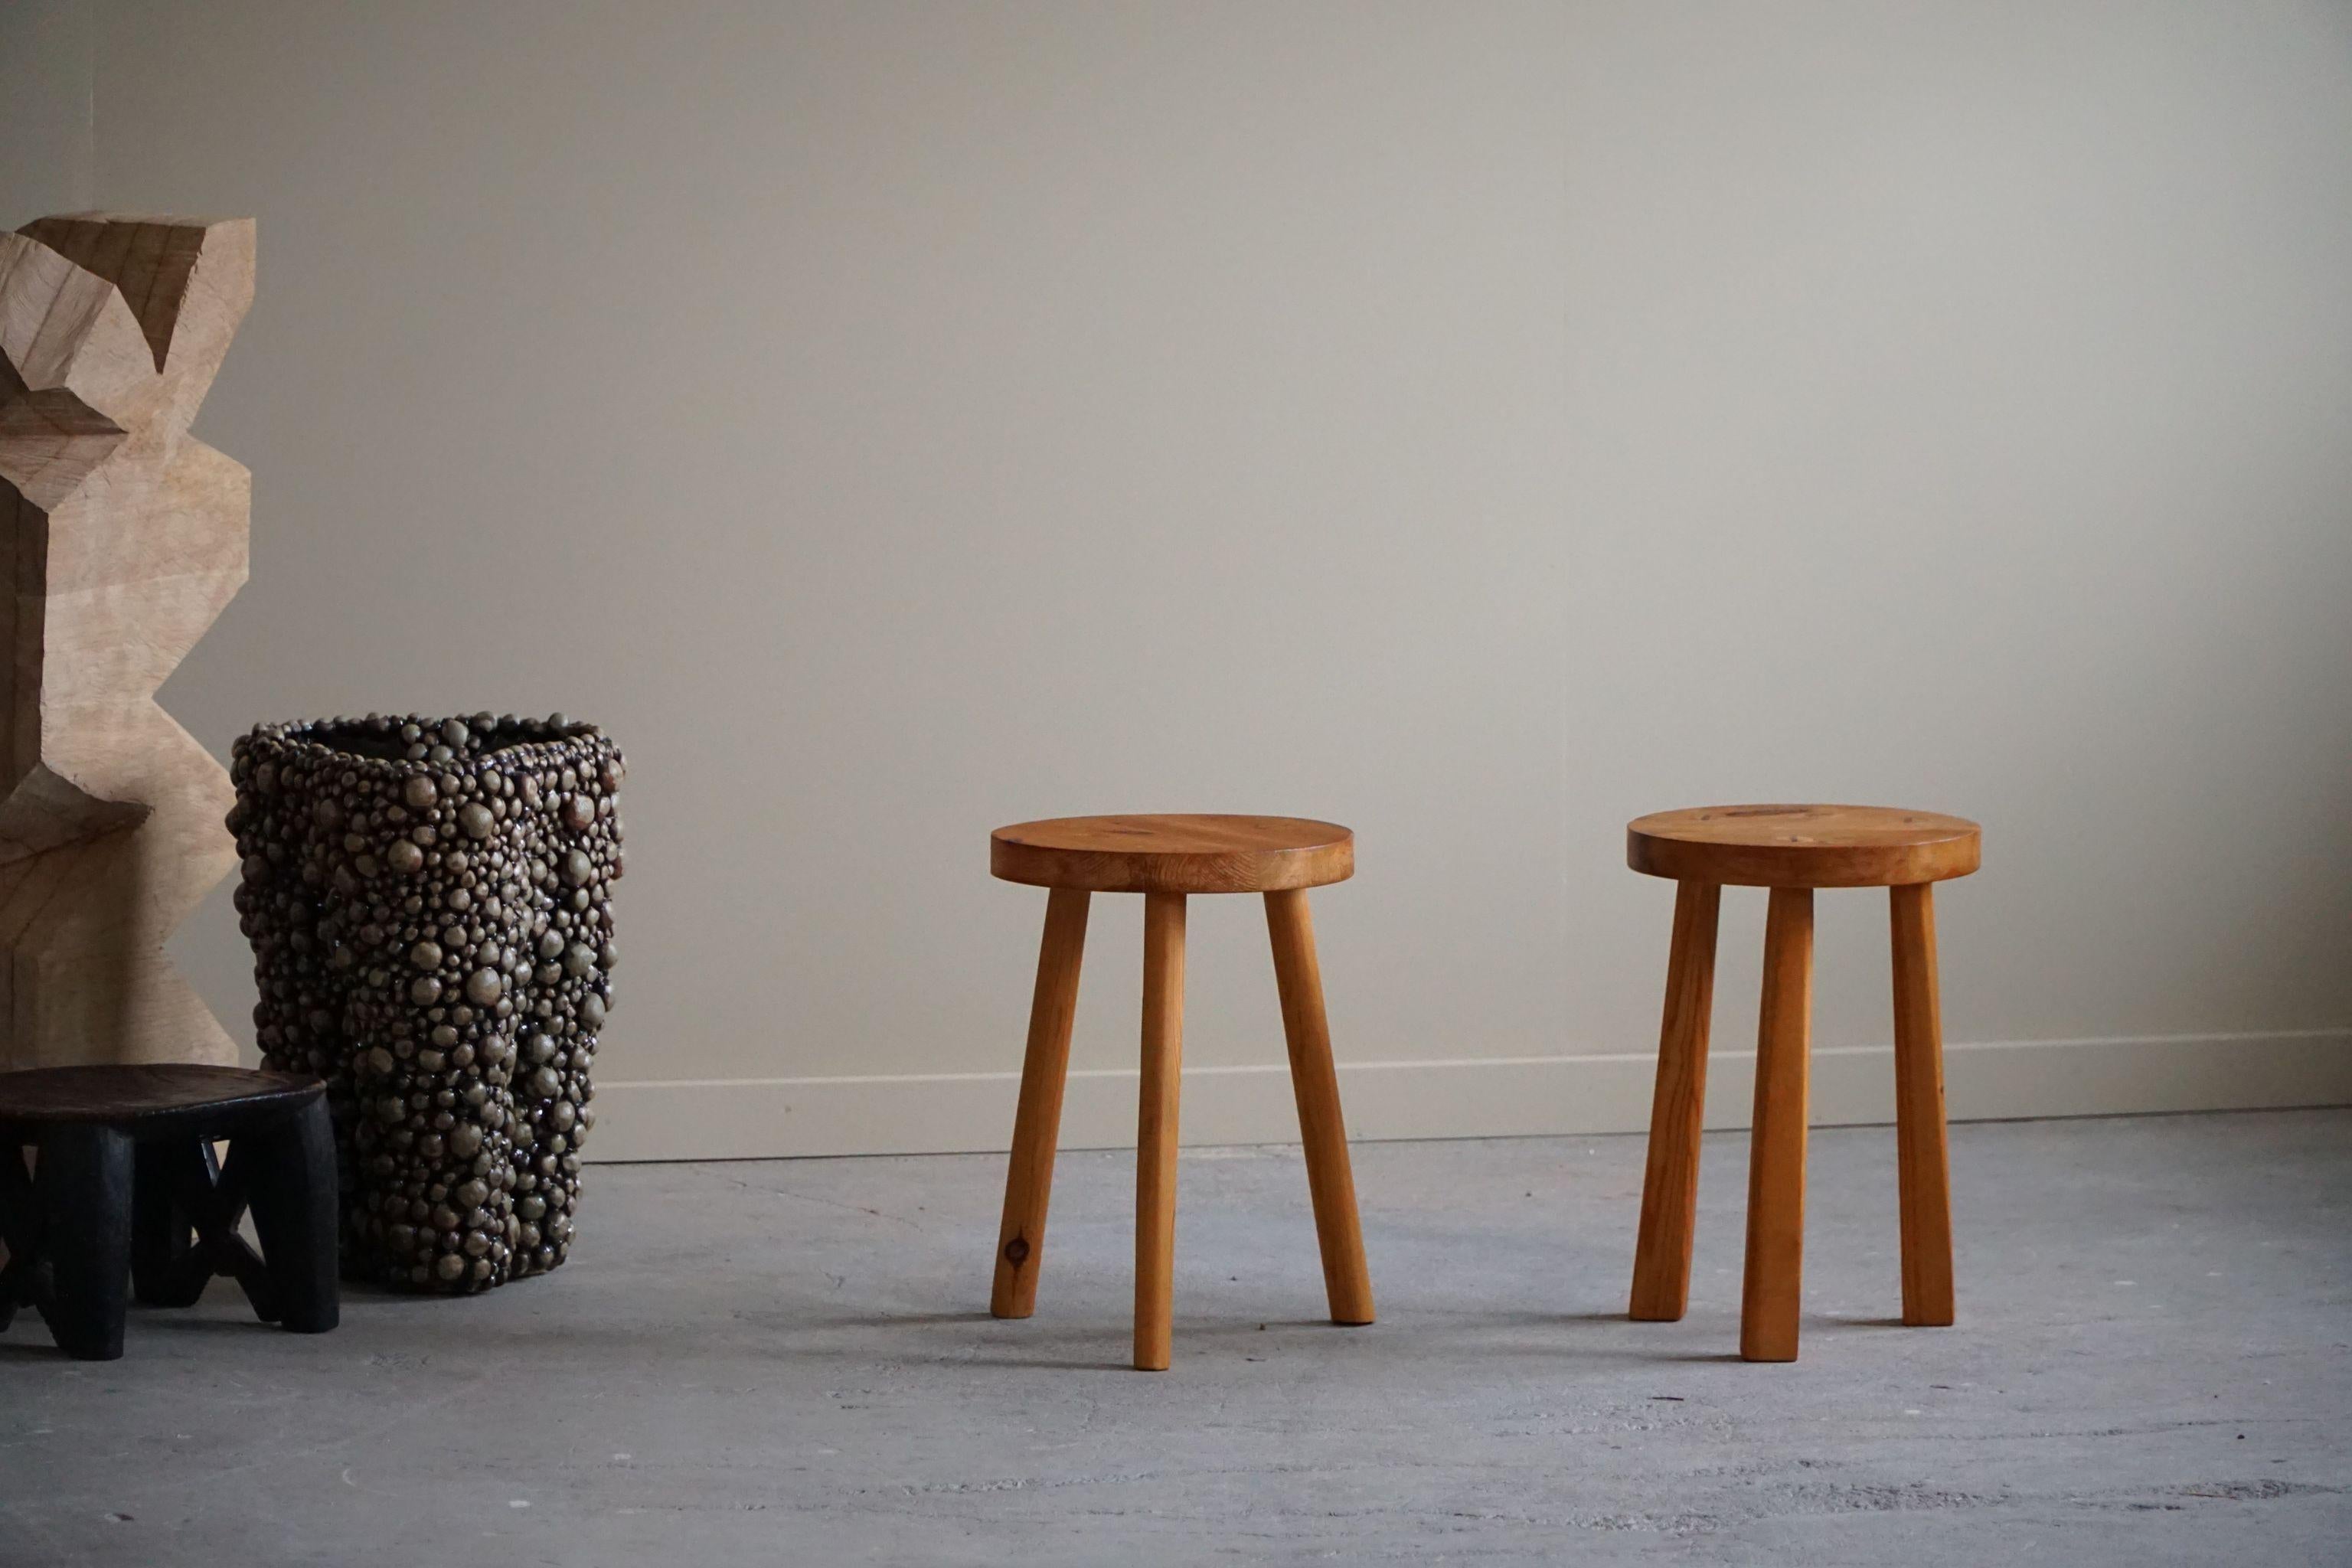 A pair of really decorative stools in solid pine. Made by a Swedish cabinetmaker in 1960s. They can easily be used as bedside tables or a decorative side table/pedestal. 

These modern stools will fit in many types of home decors. Perfectly suited